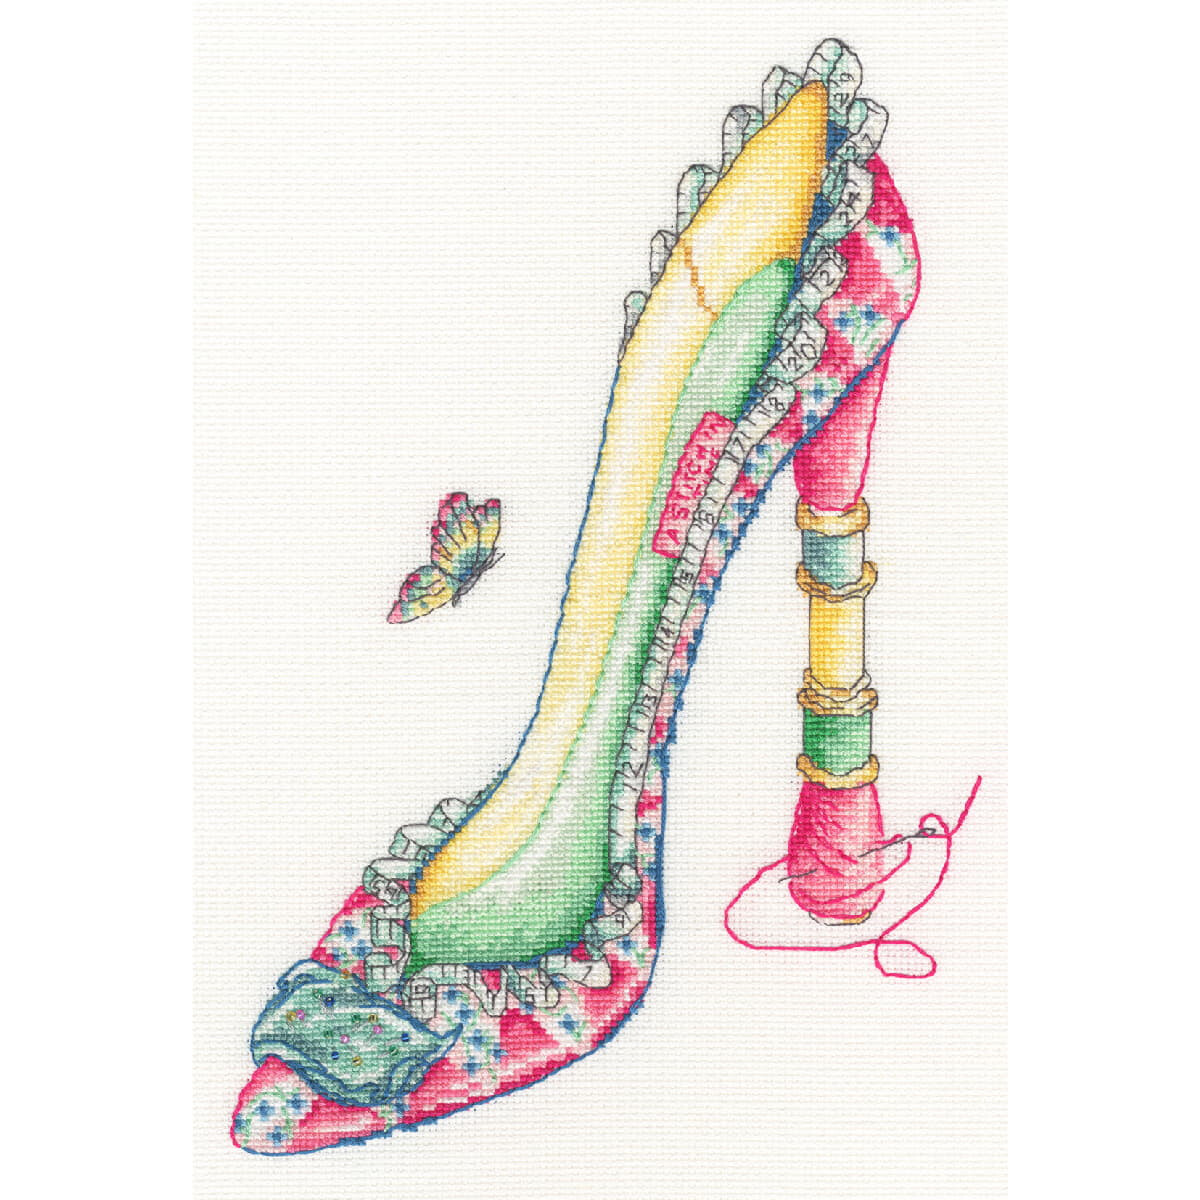 Illustration of a high-heeled shoe with a floral pattern...